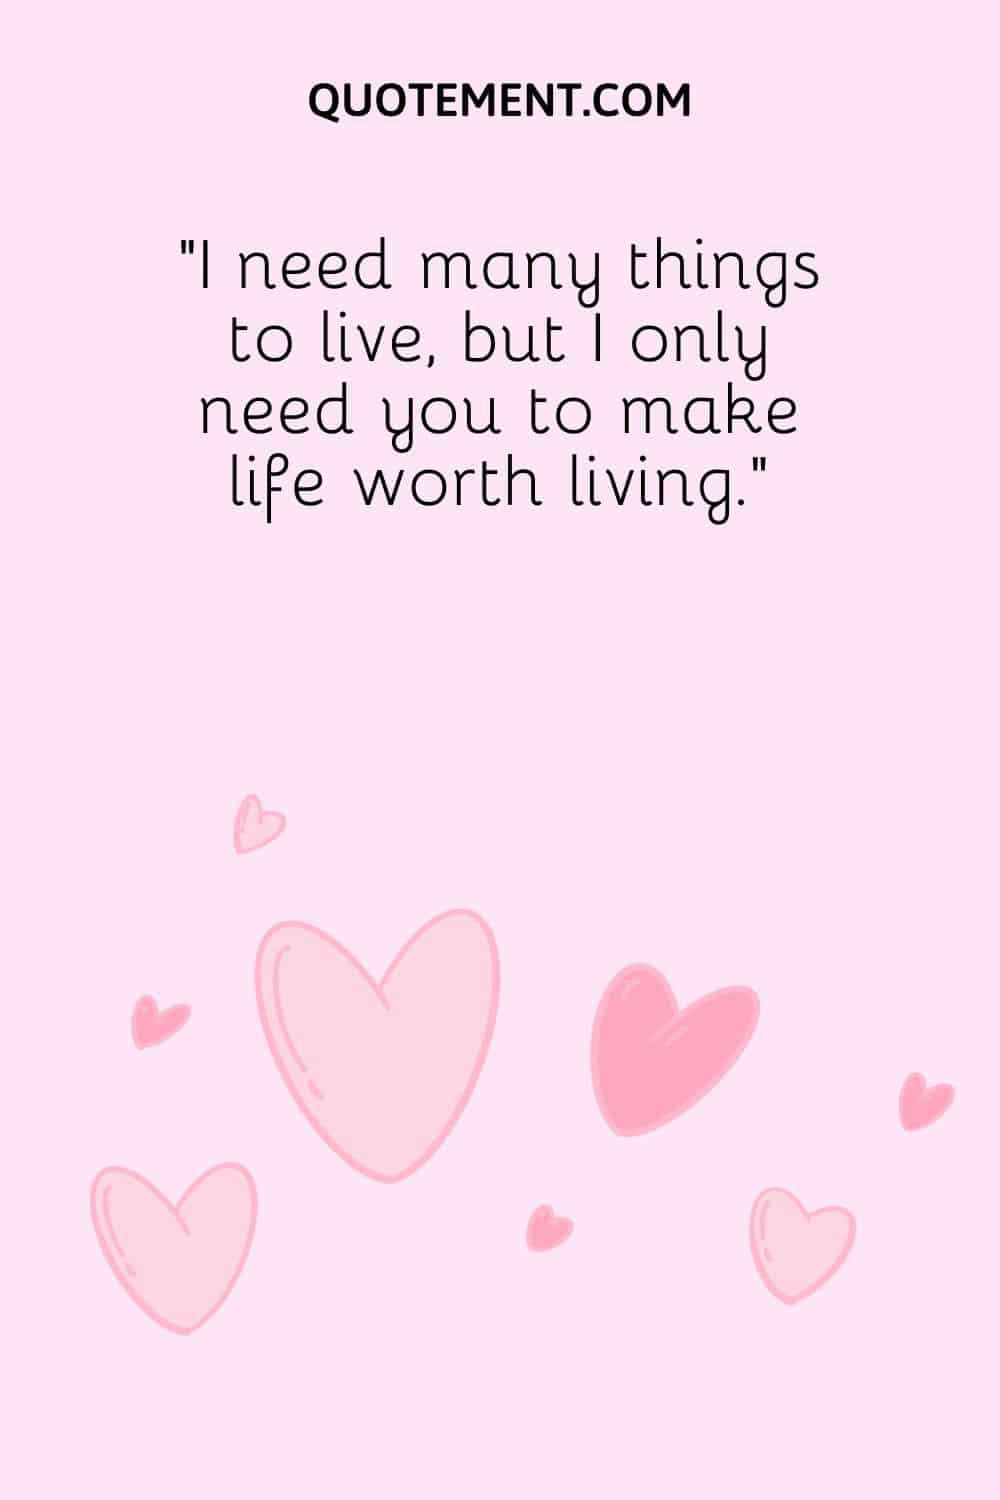 “I need many things to live, but I only need you to make life worth living.”